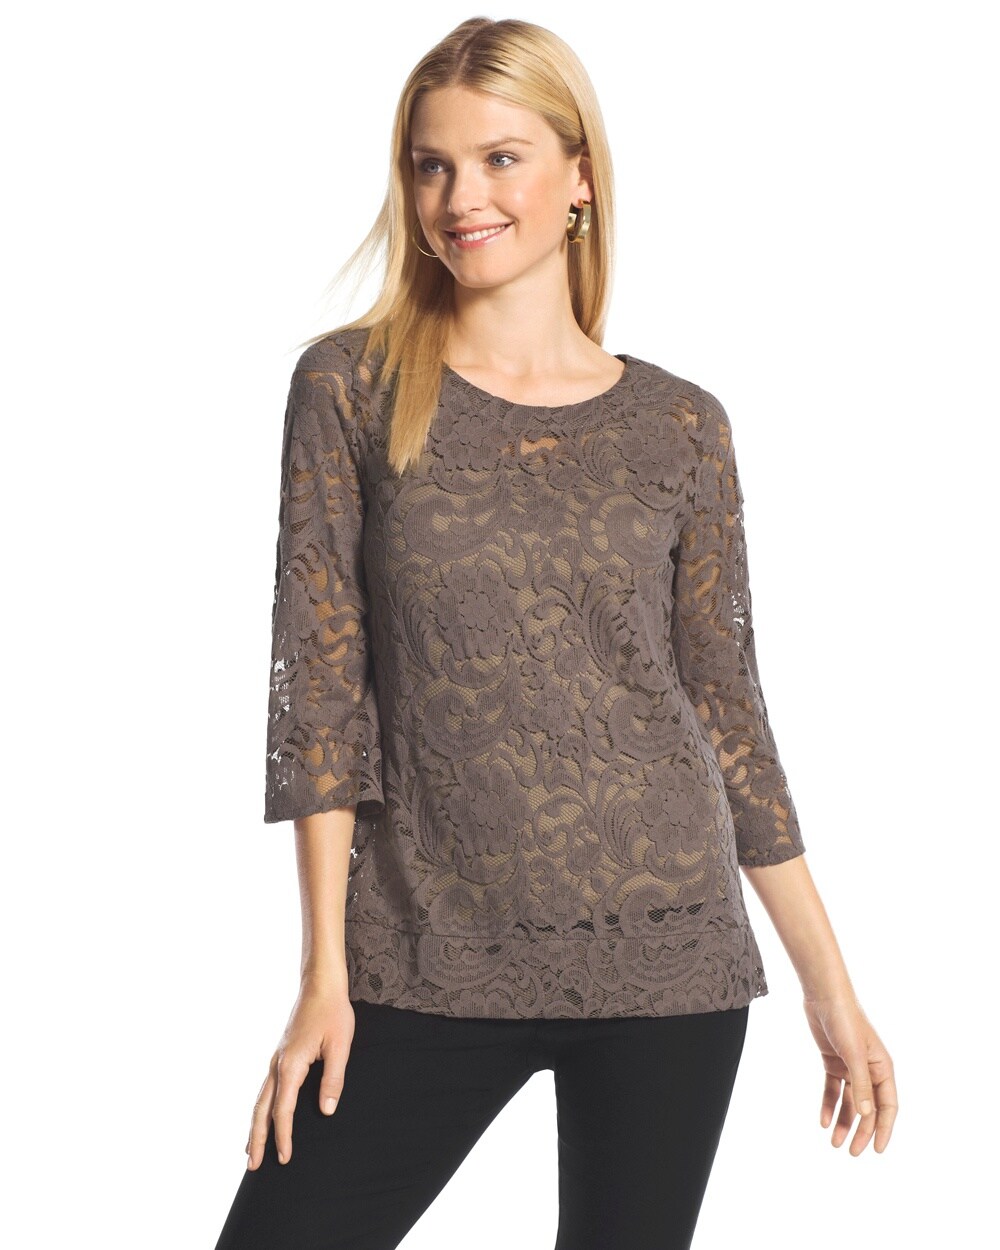 Allegra Lace Top